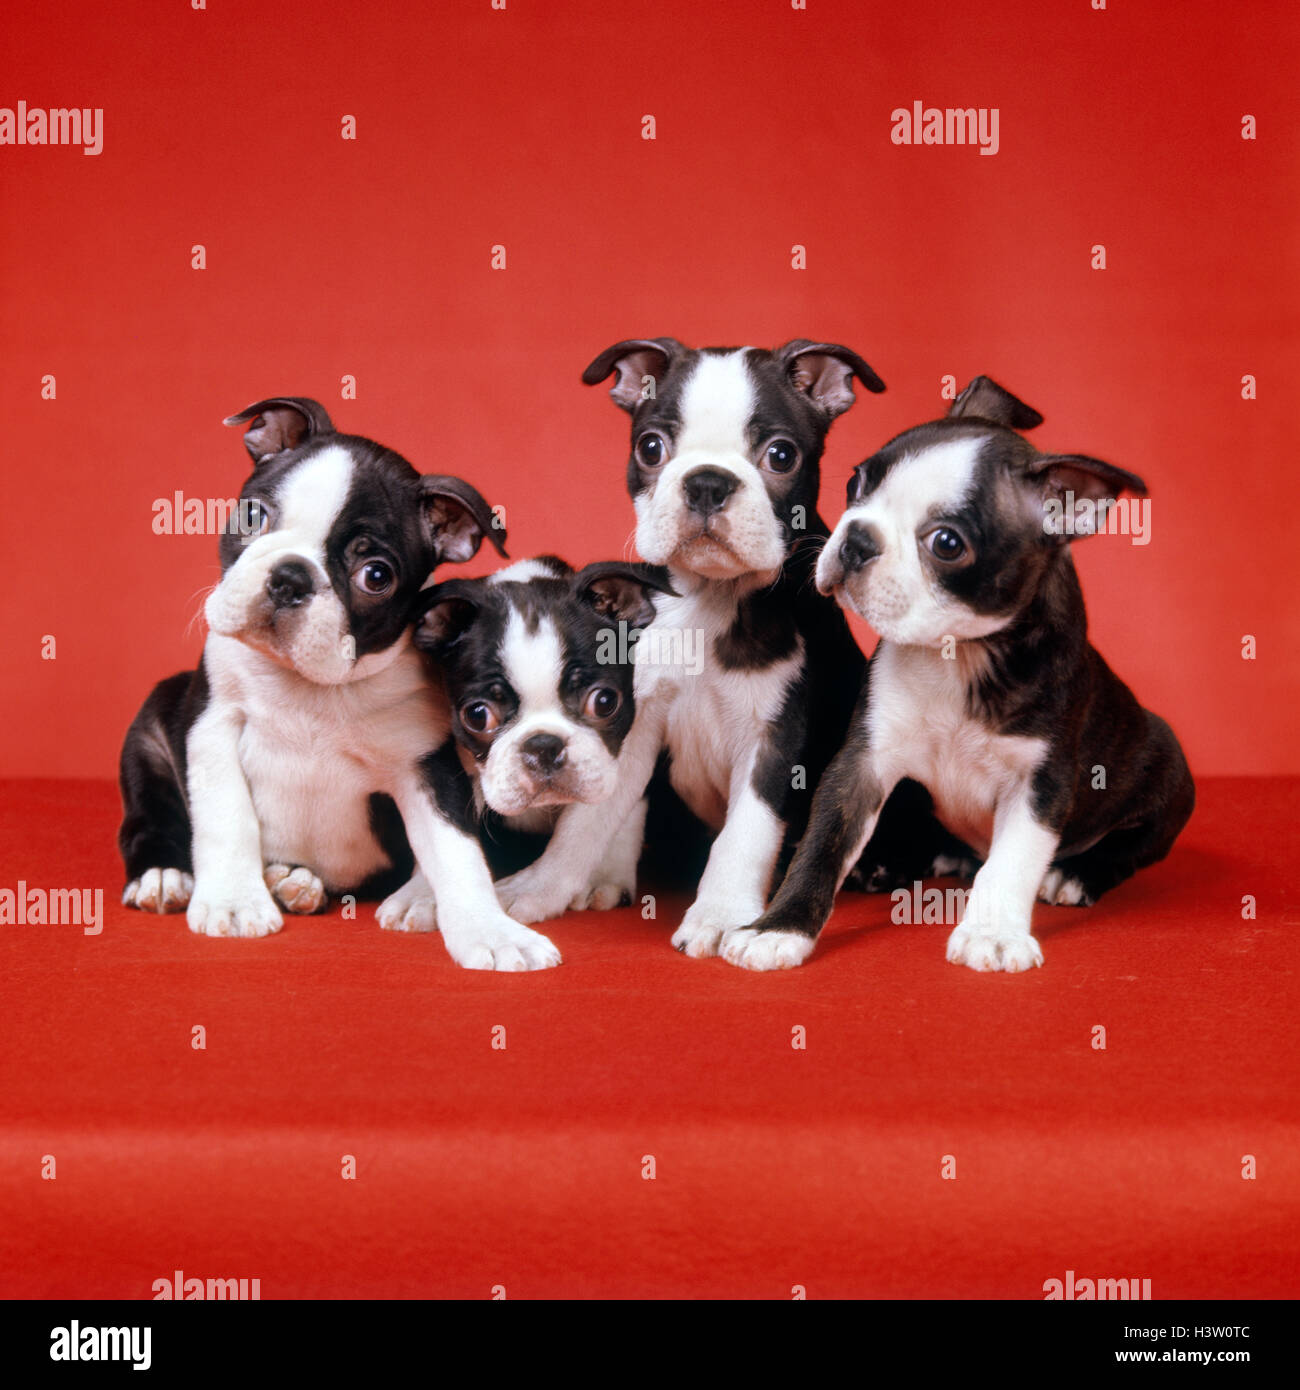 FOUR BOSTON TERRIER PUPPIES ON RED BACKGROUND LOOKING AT CAMERA FUNNY FACES Stock Photo